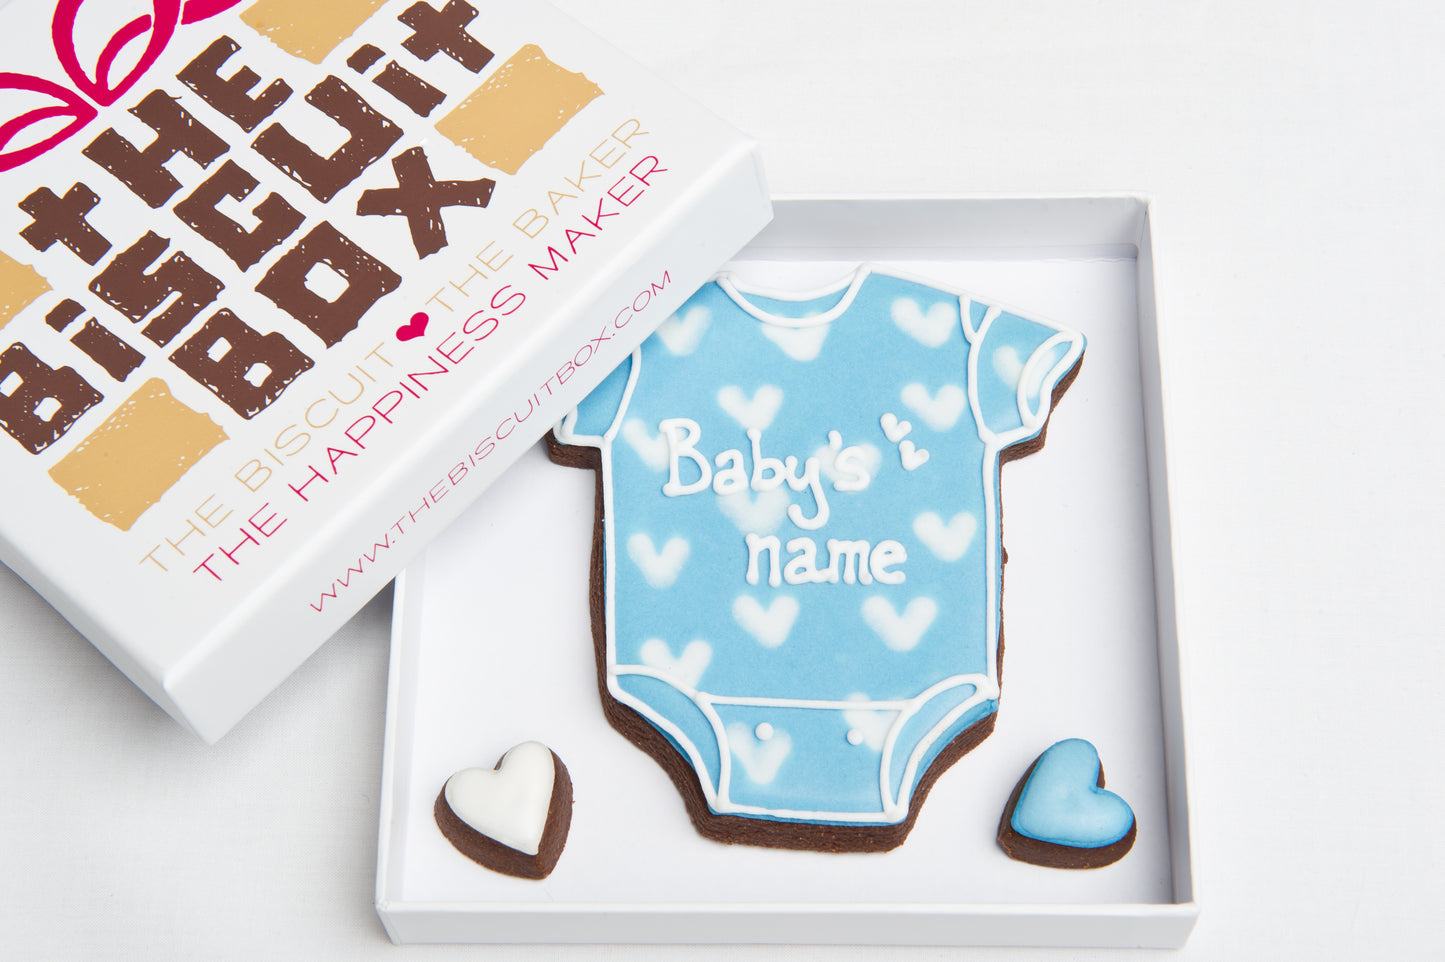 baby vest with iced blue and white hearts with baby's name iced onto it shown in biscuit card packaging